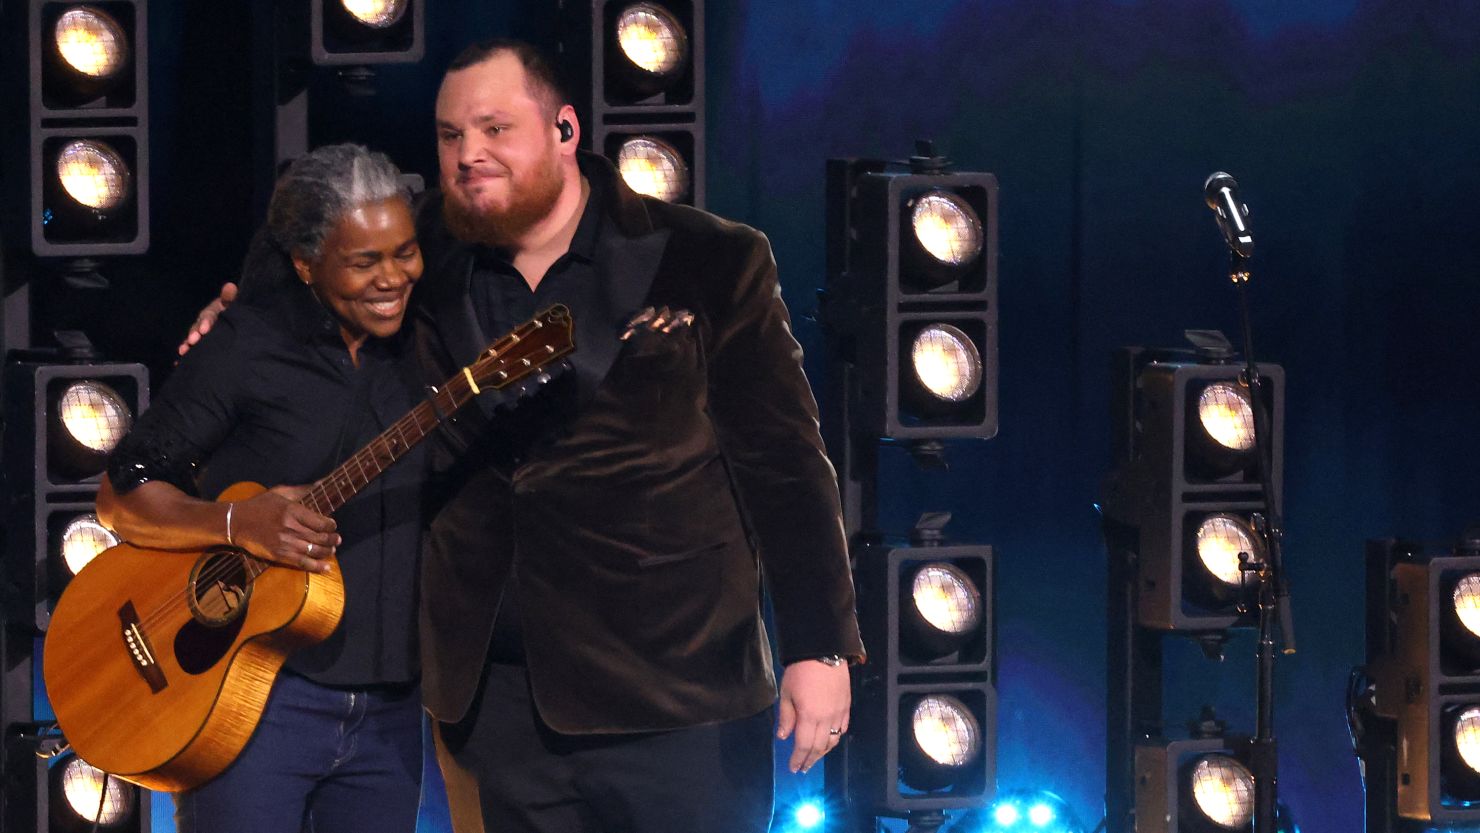 Tracy Chapman performs ‘Fast Car’ with Luke Combs in heartfelt Grammys